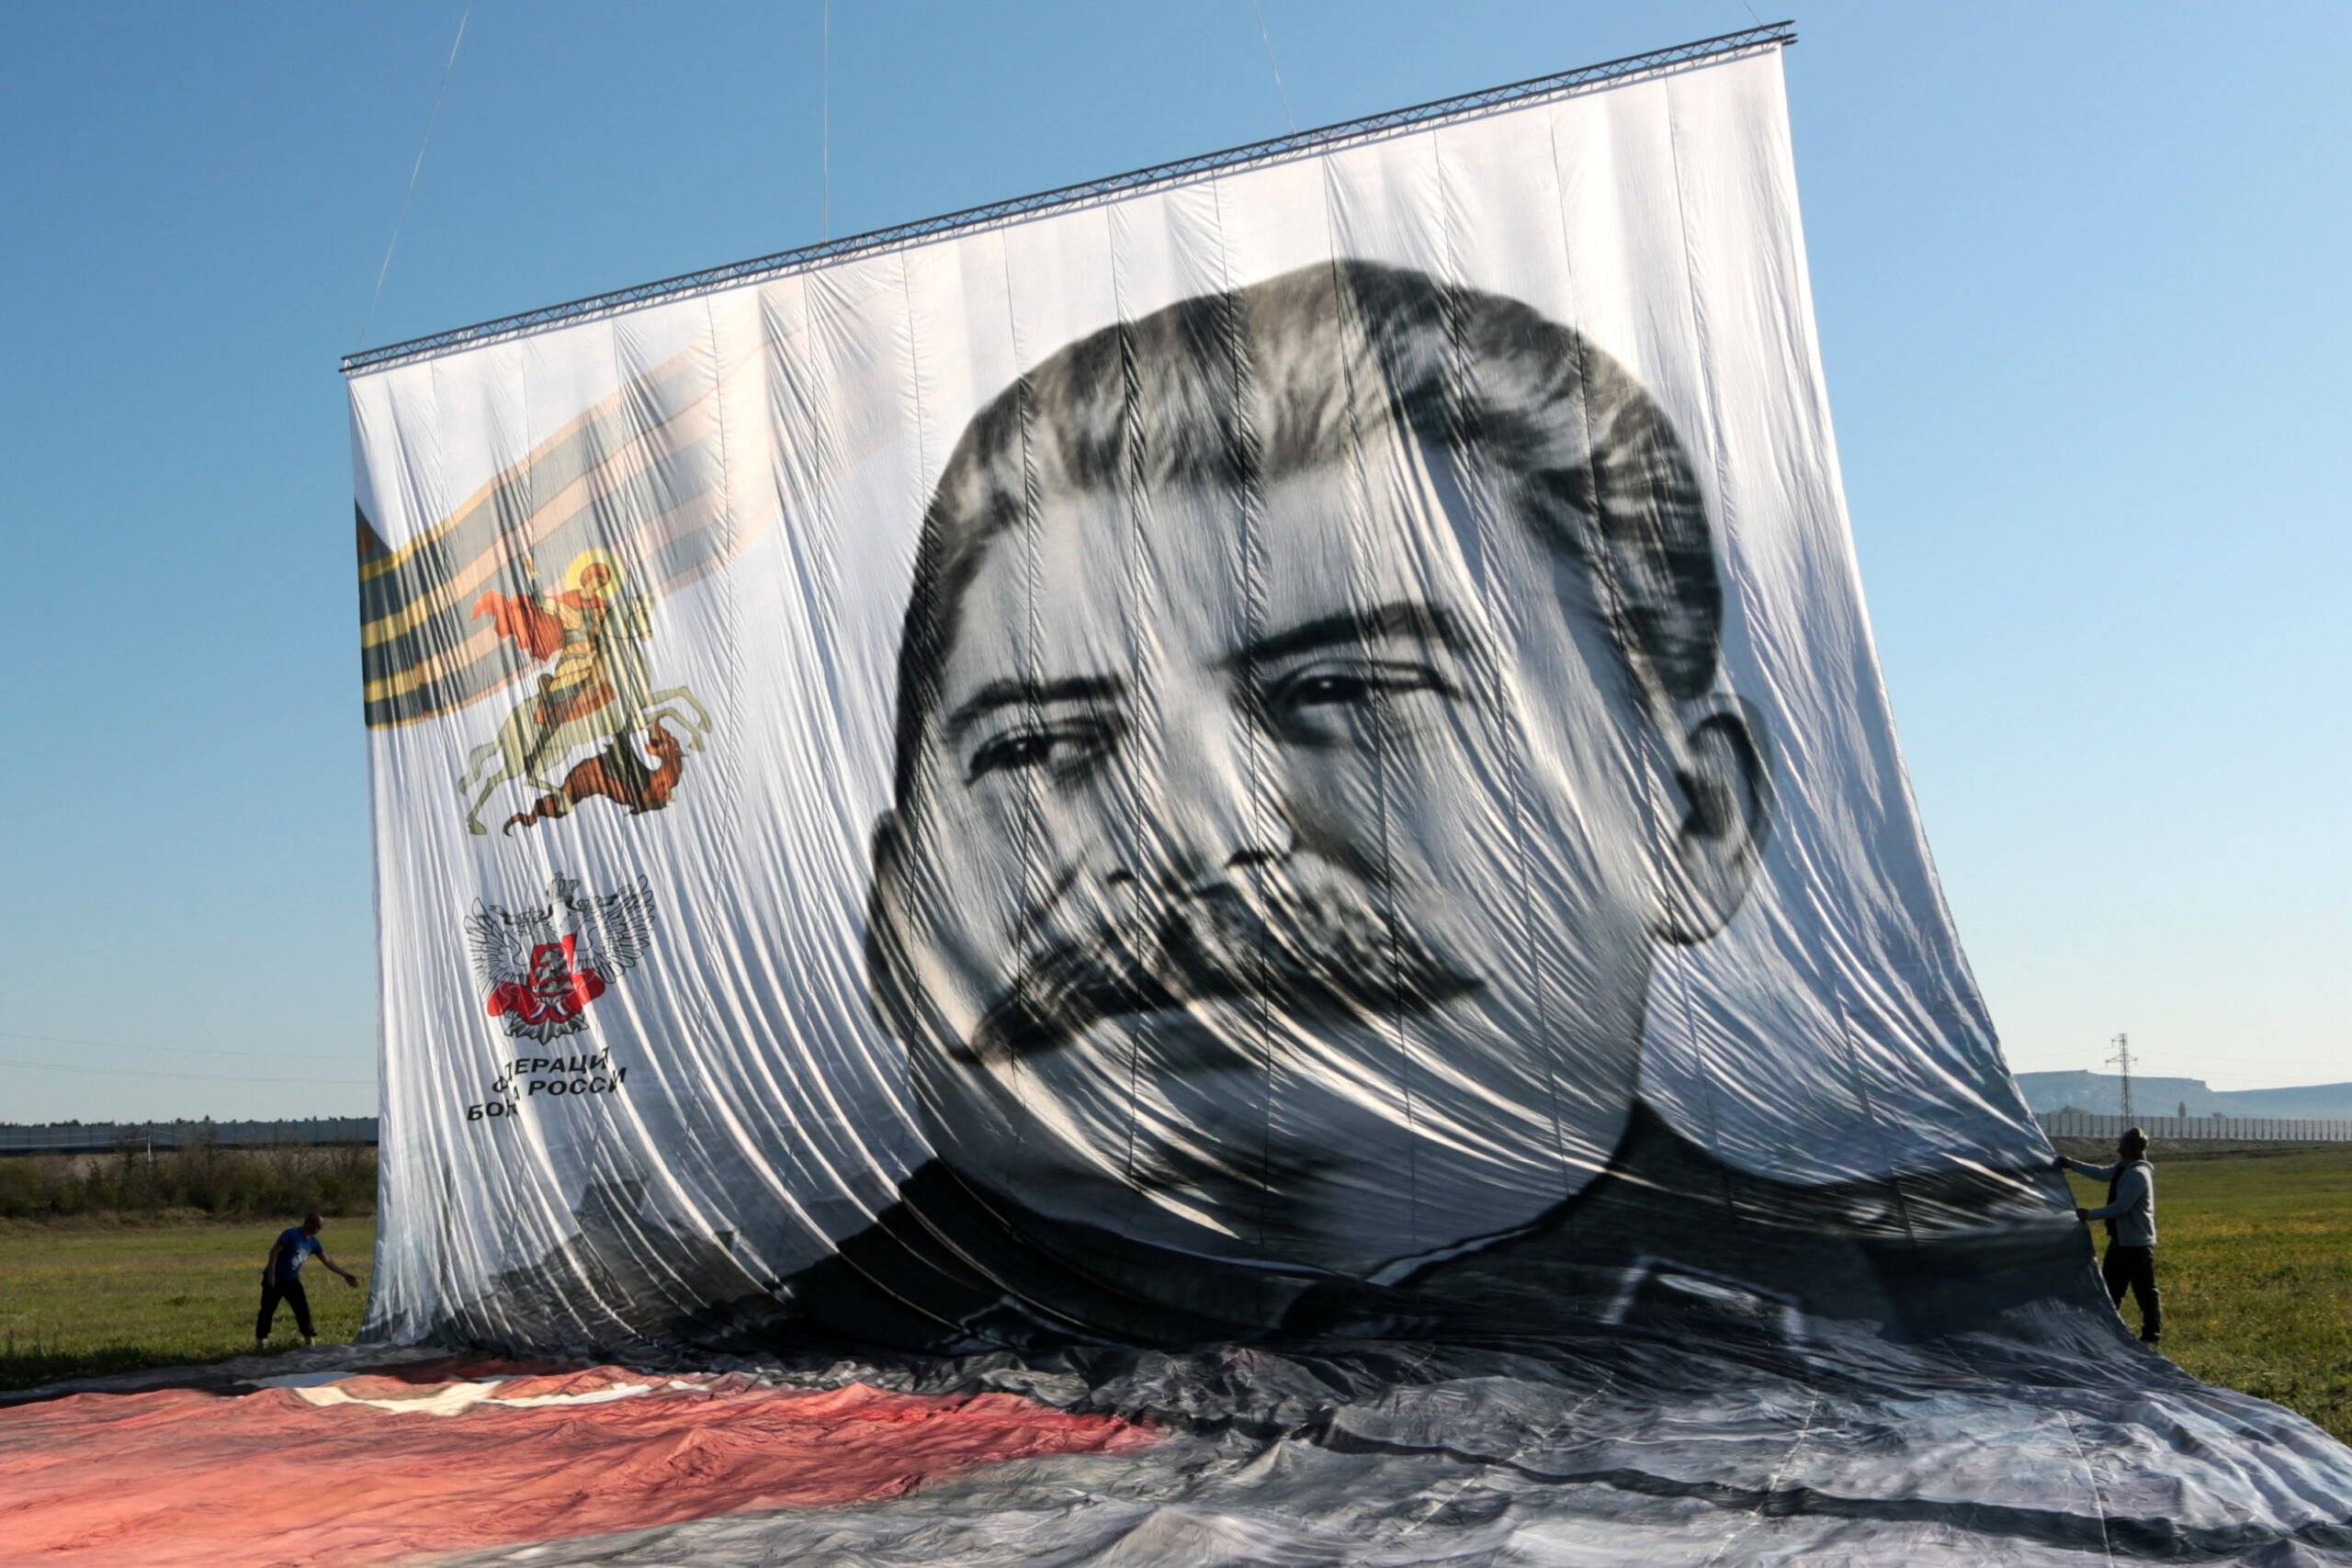 Russian Boxing Federation lifts a portrait of late Soviet leader Joseph Stalin with a hot air balloon, close to city of Belogorsk outside Simferopol, Crimea, on May 11, 2020, to mark the 75th anniversary of the end of World War II also called the Great Patriotic War, amid the coronavirus (COVID) pandemic. (Photo by - / AFP)